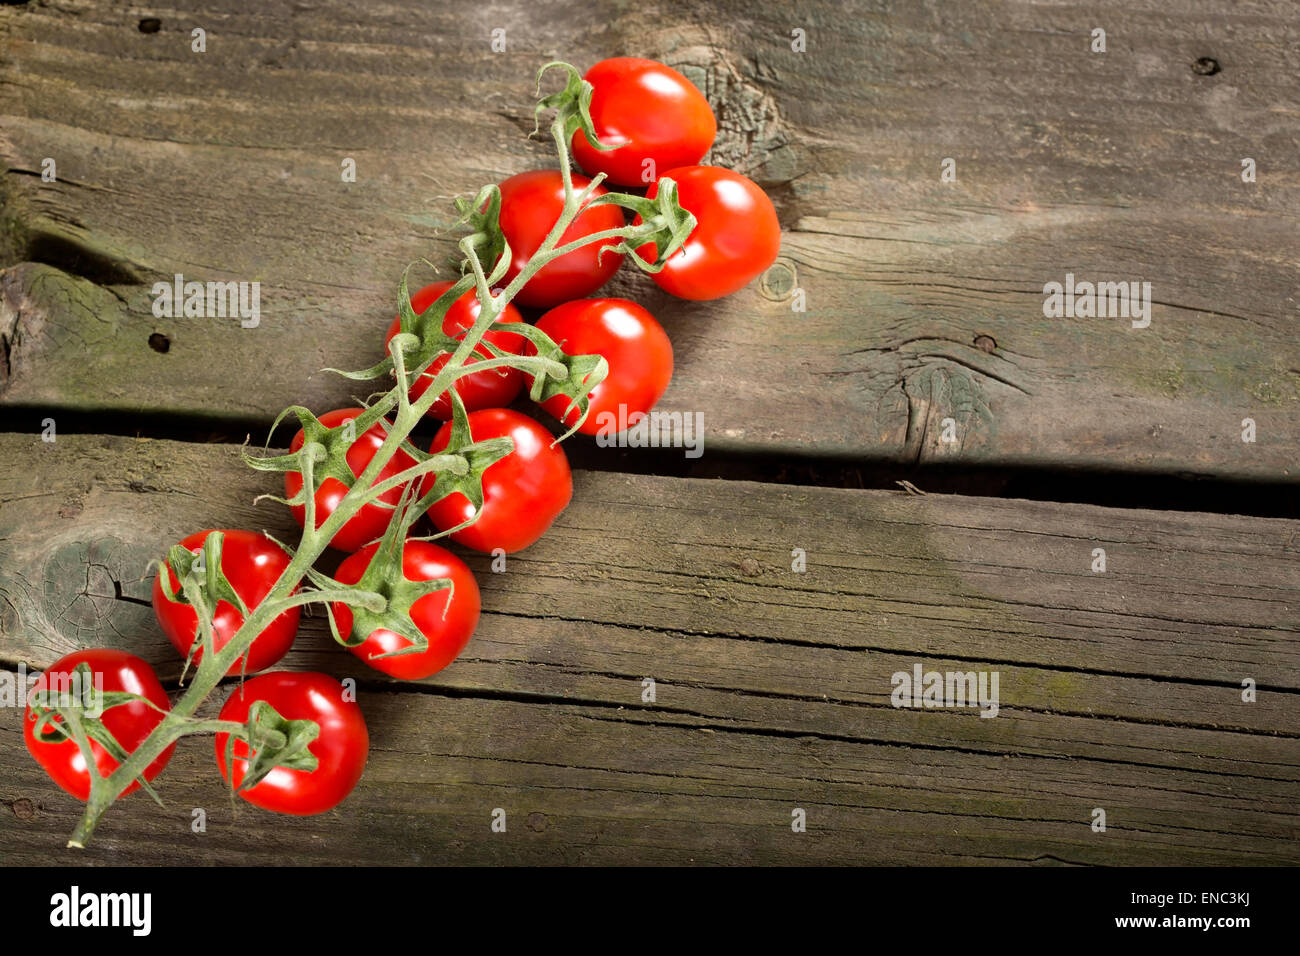 Some cherry tomatoes on a wooden surface with copy space Stock Photo